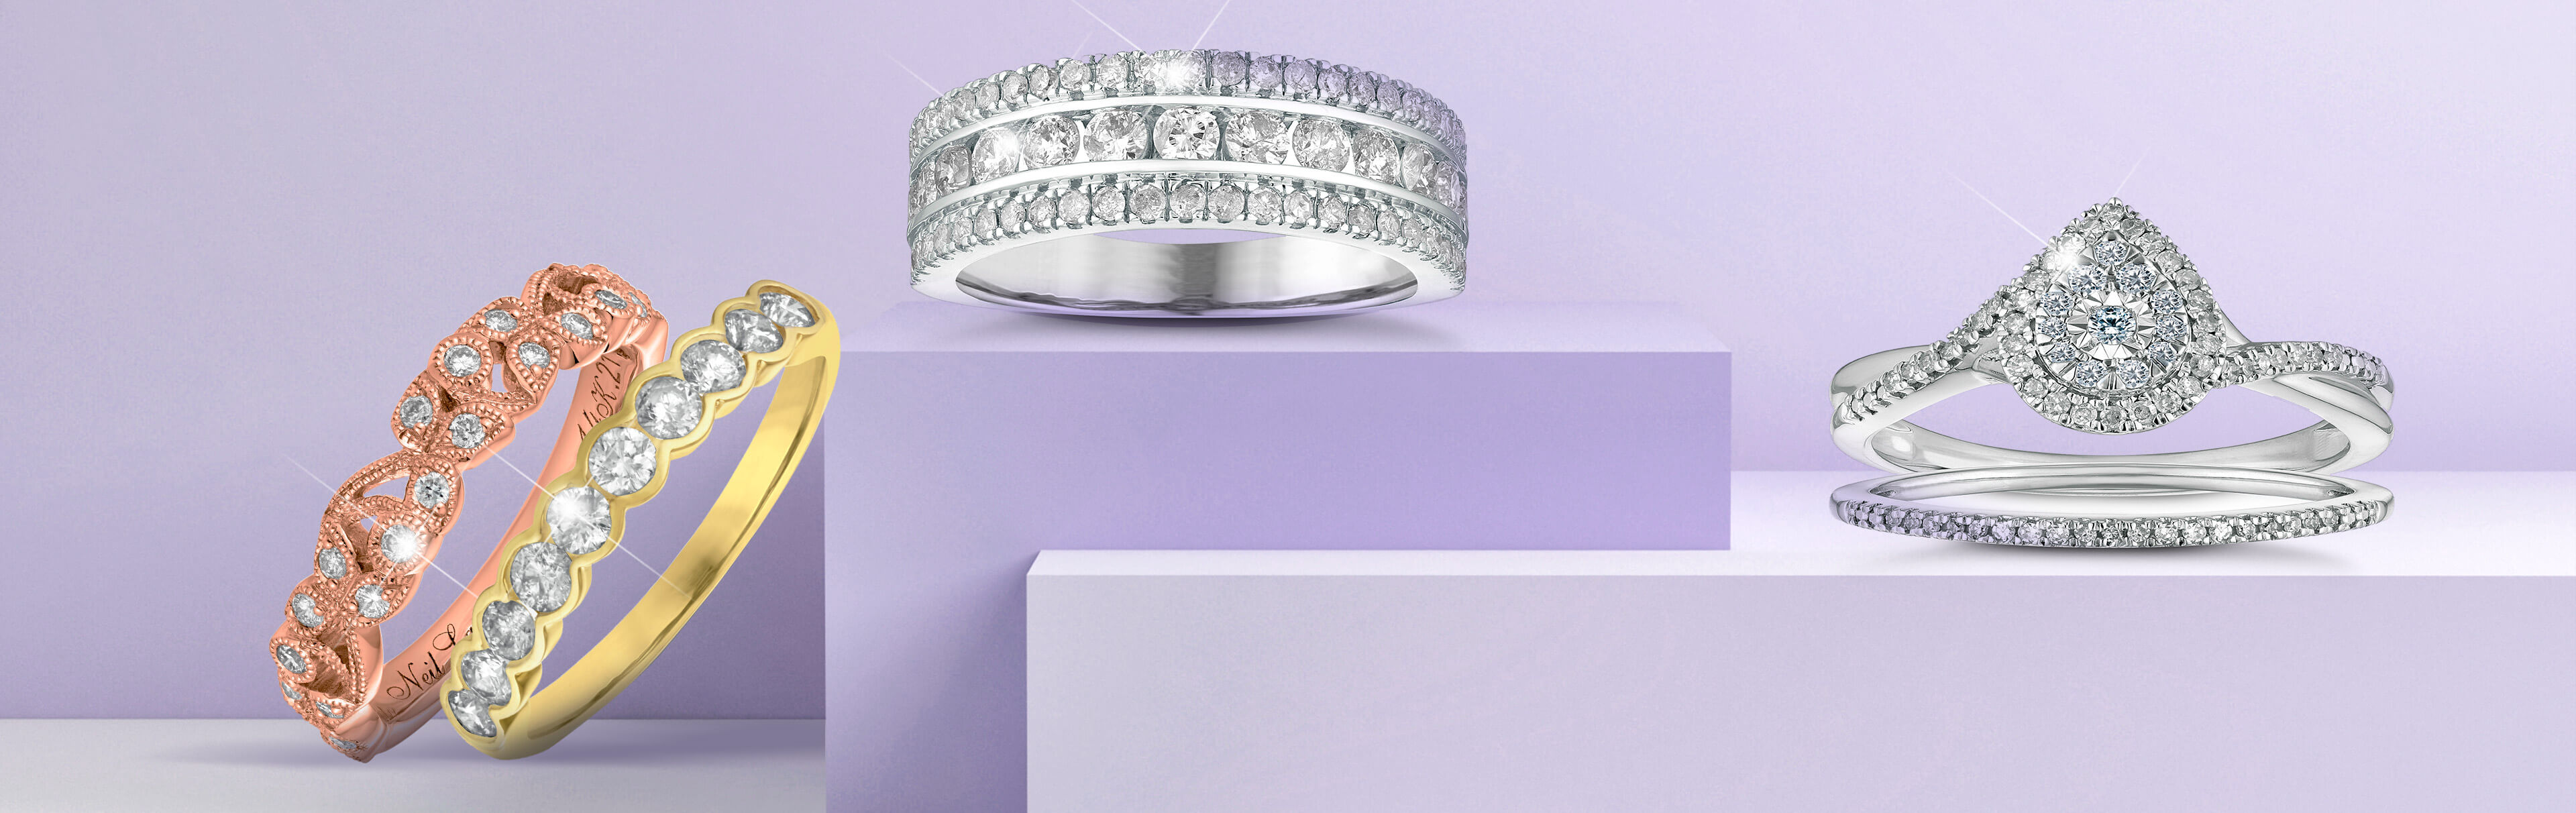 Ring Pairing Guide - How to Match a Wedding Band to an Engagement